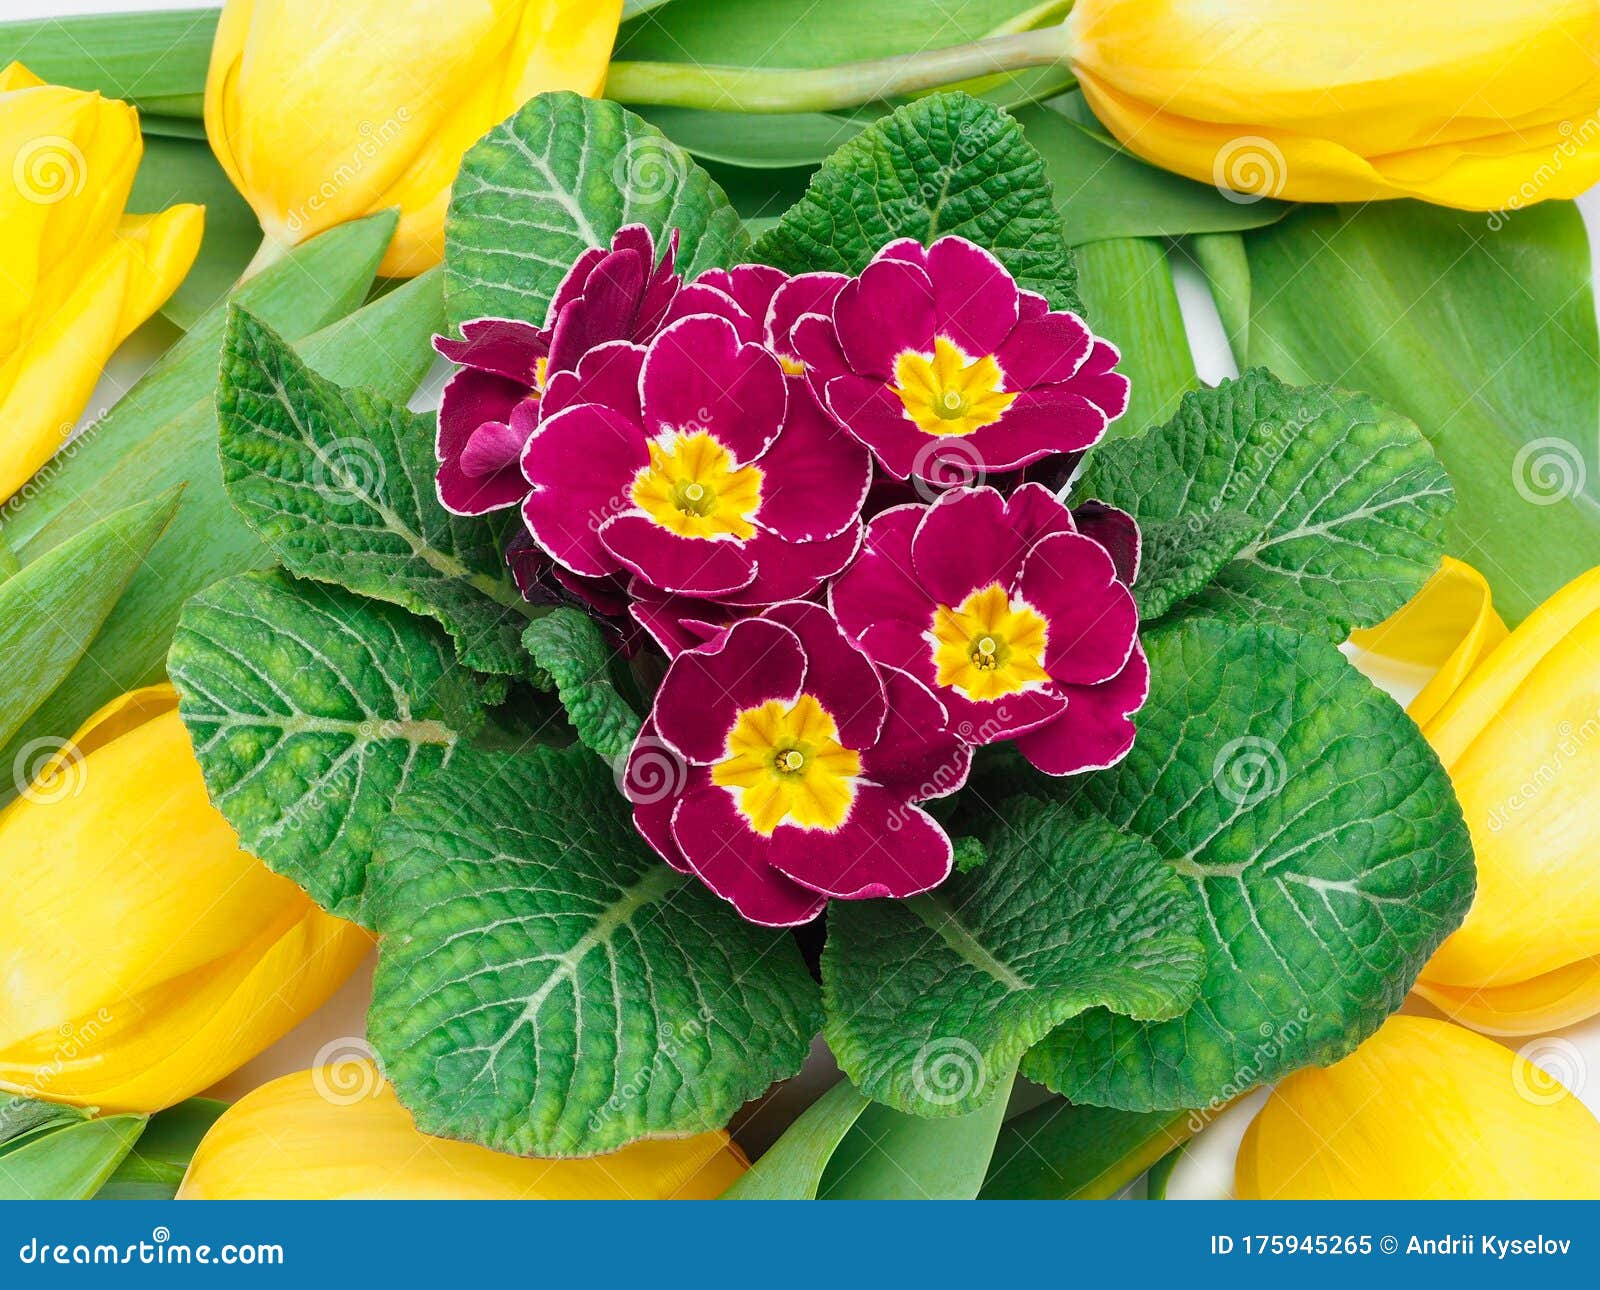 Primula Vulgaris The Common Primrose A Flowering Plant Surrounded By Tulips Stock Image Image Of Decoration Evening 175945265